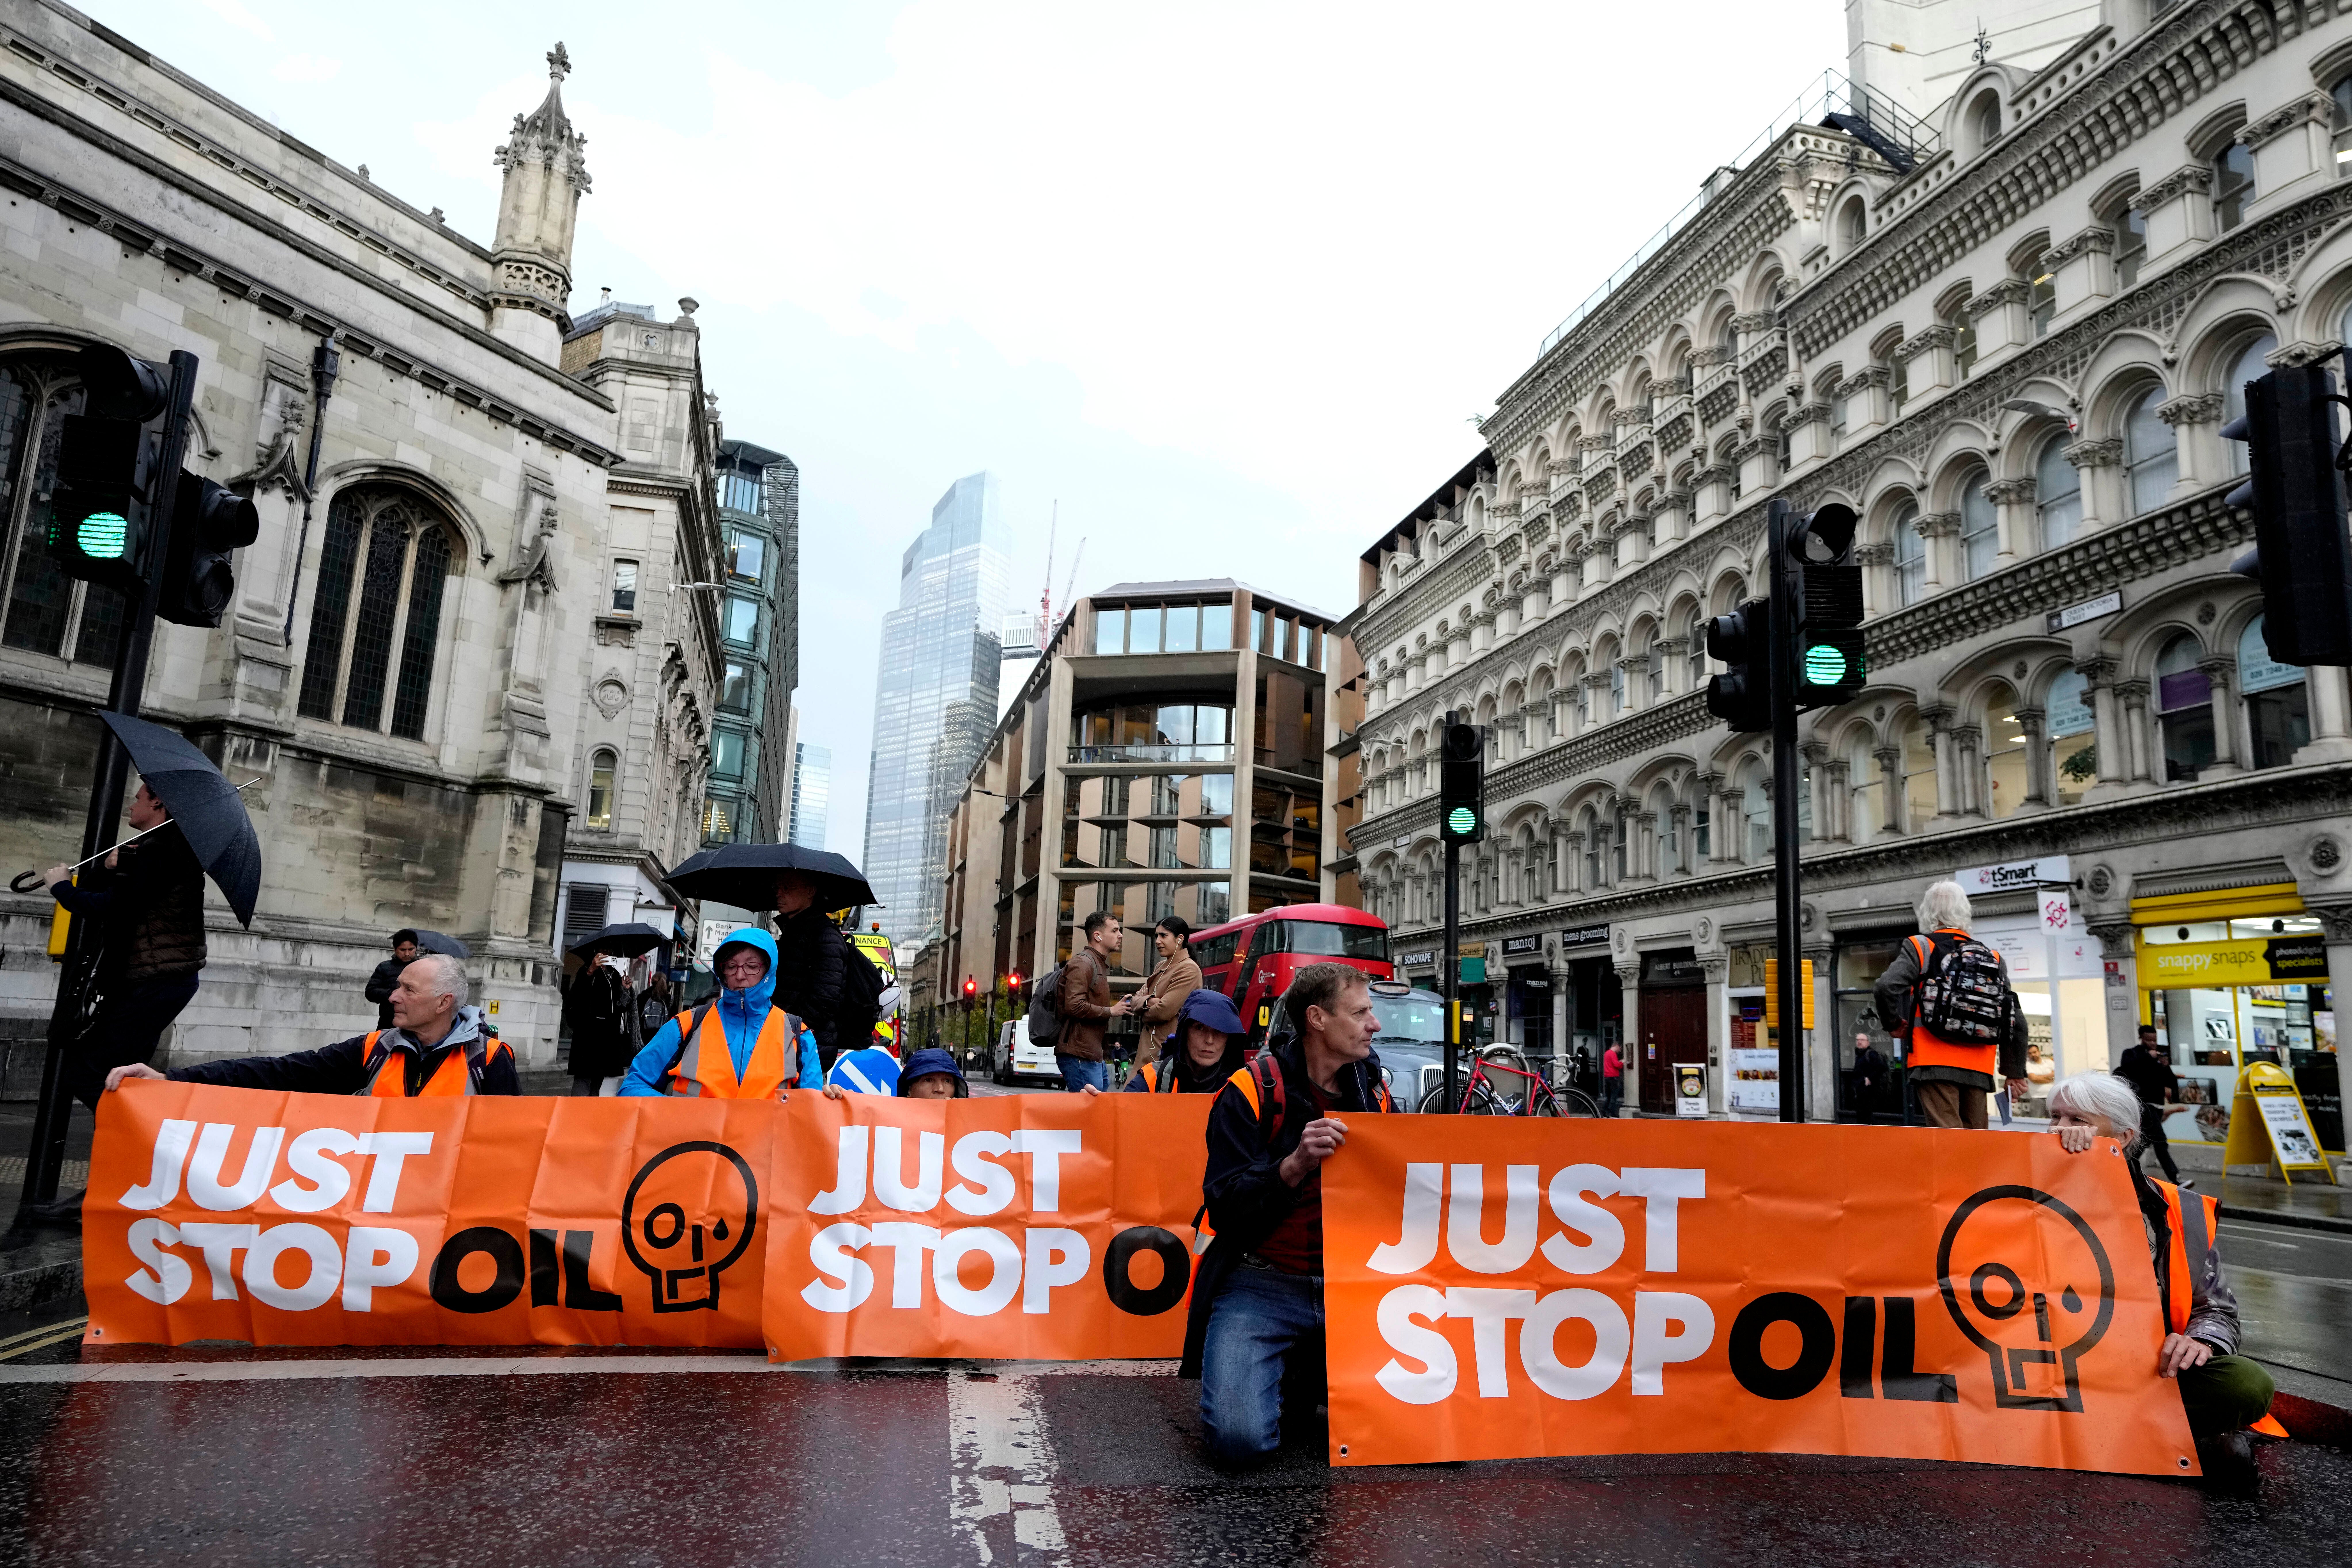 Just Stop Oil is calling for an end to all new oil and gas licenses